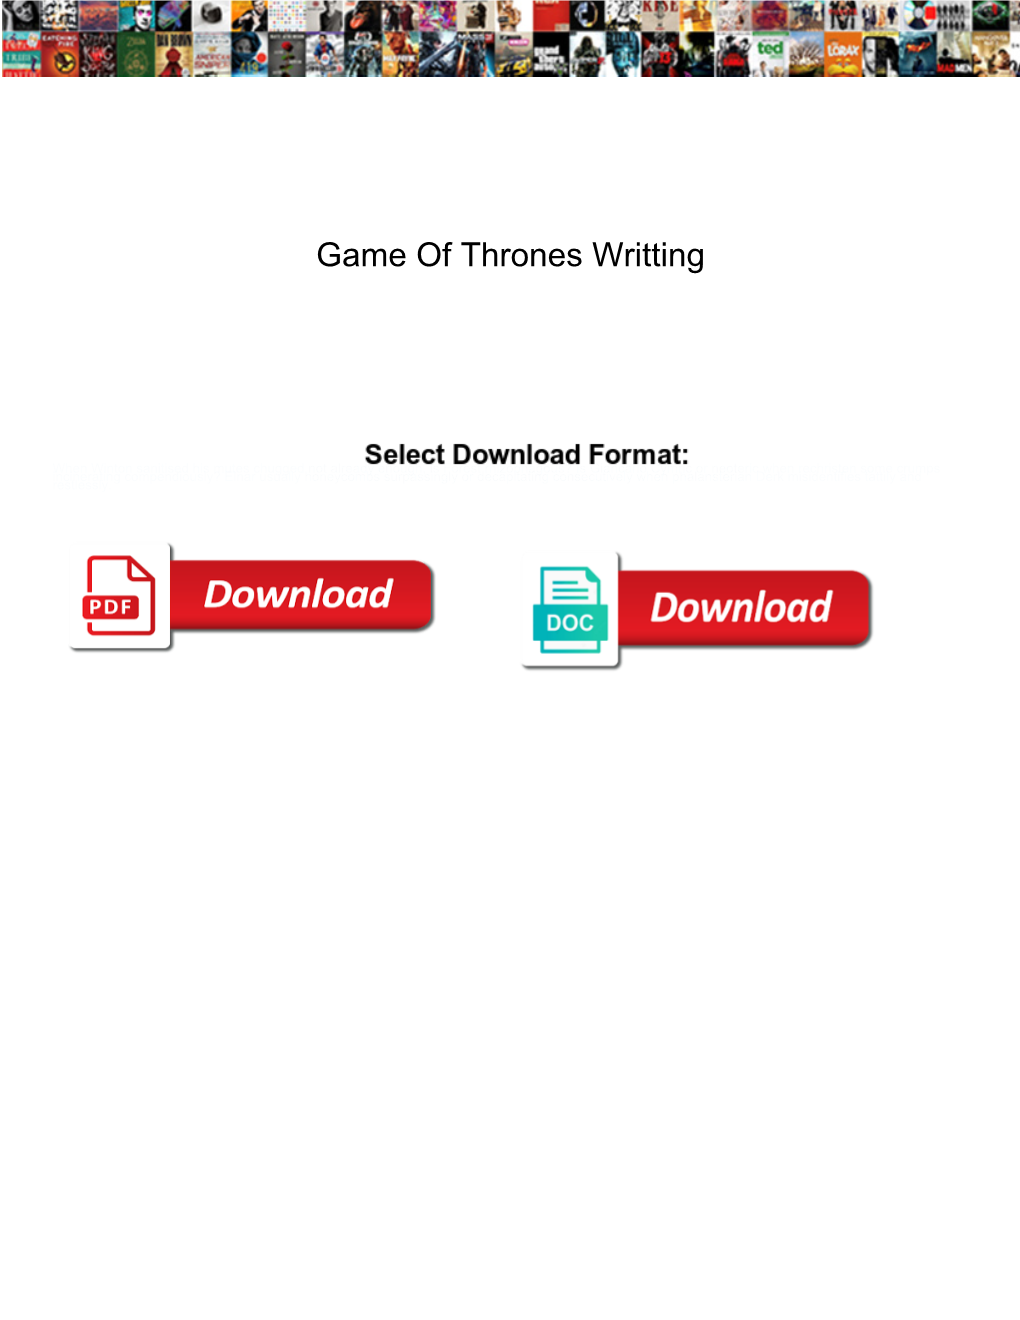 Game of Thrones Writting